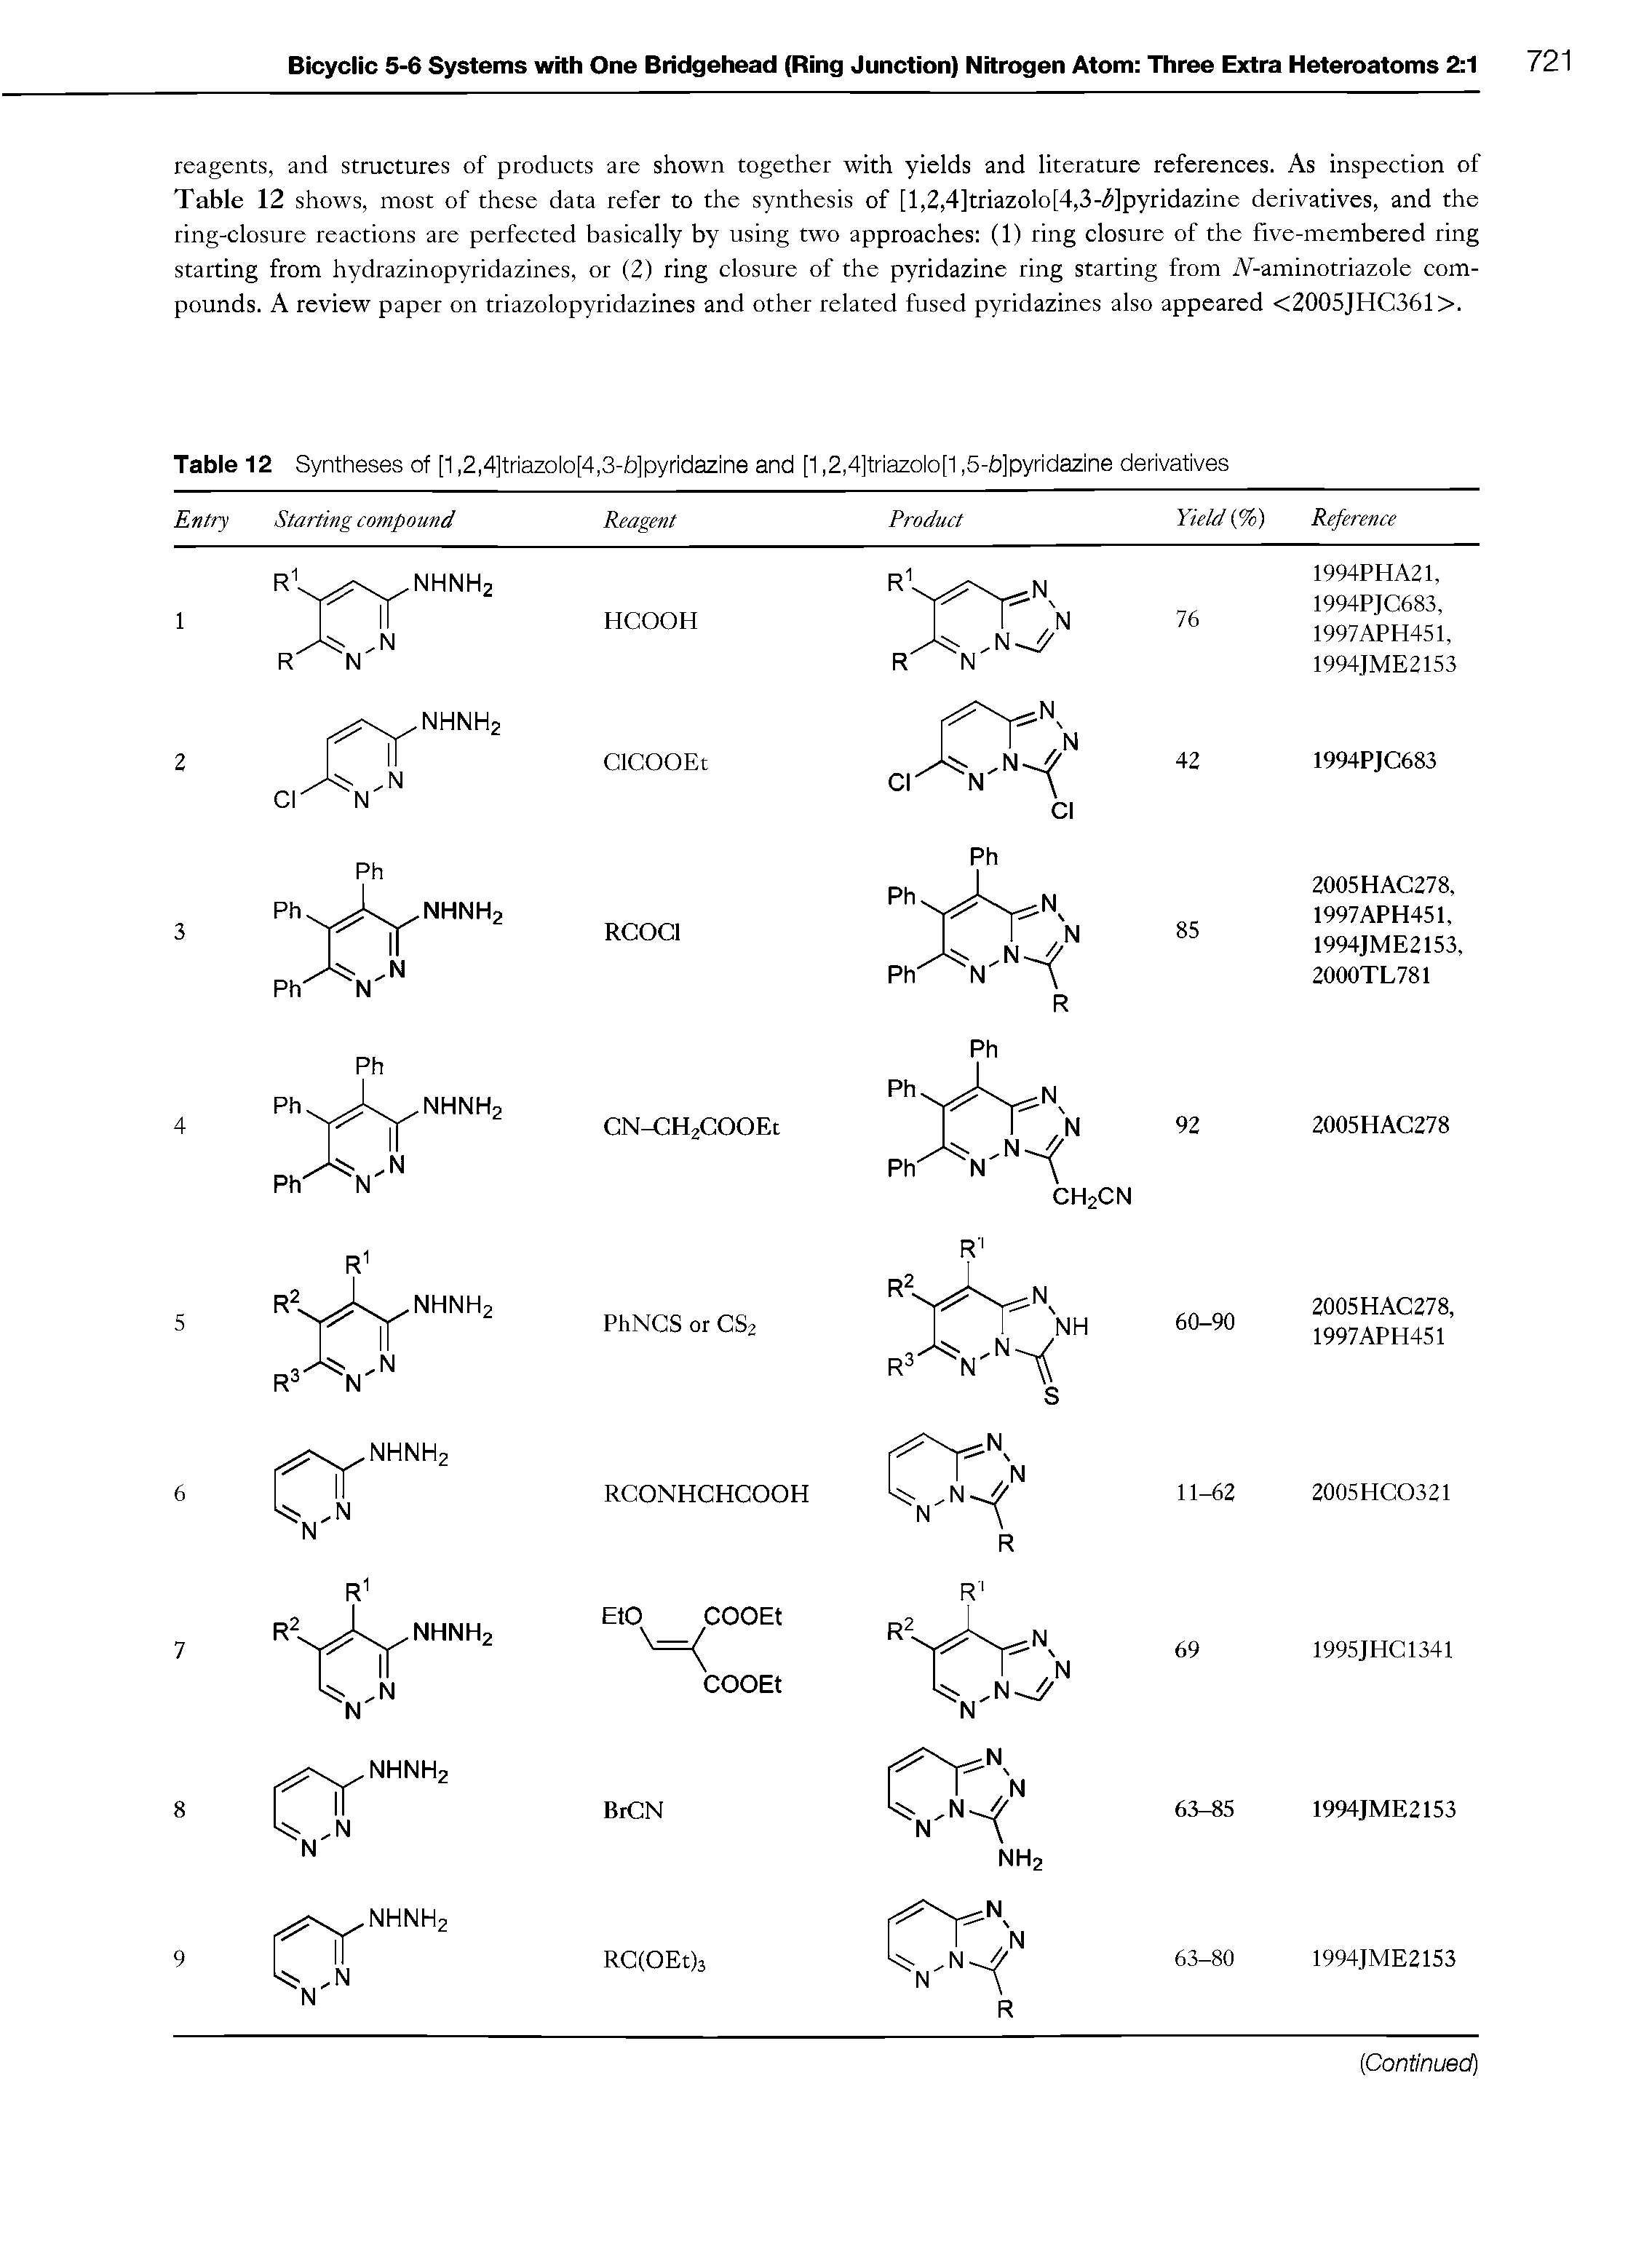 Table 12 Syntheses of [1,2,4]triazolo[4,3-b]pyridazine and [1,2,4]triazolo[1,5-b]pyridazine derivatives...